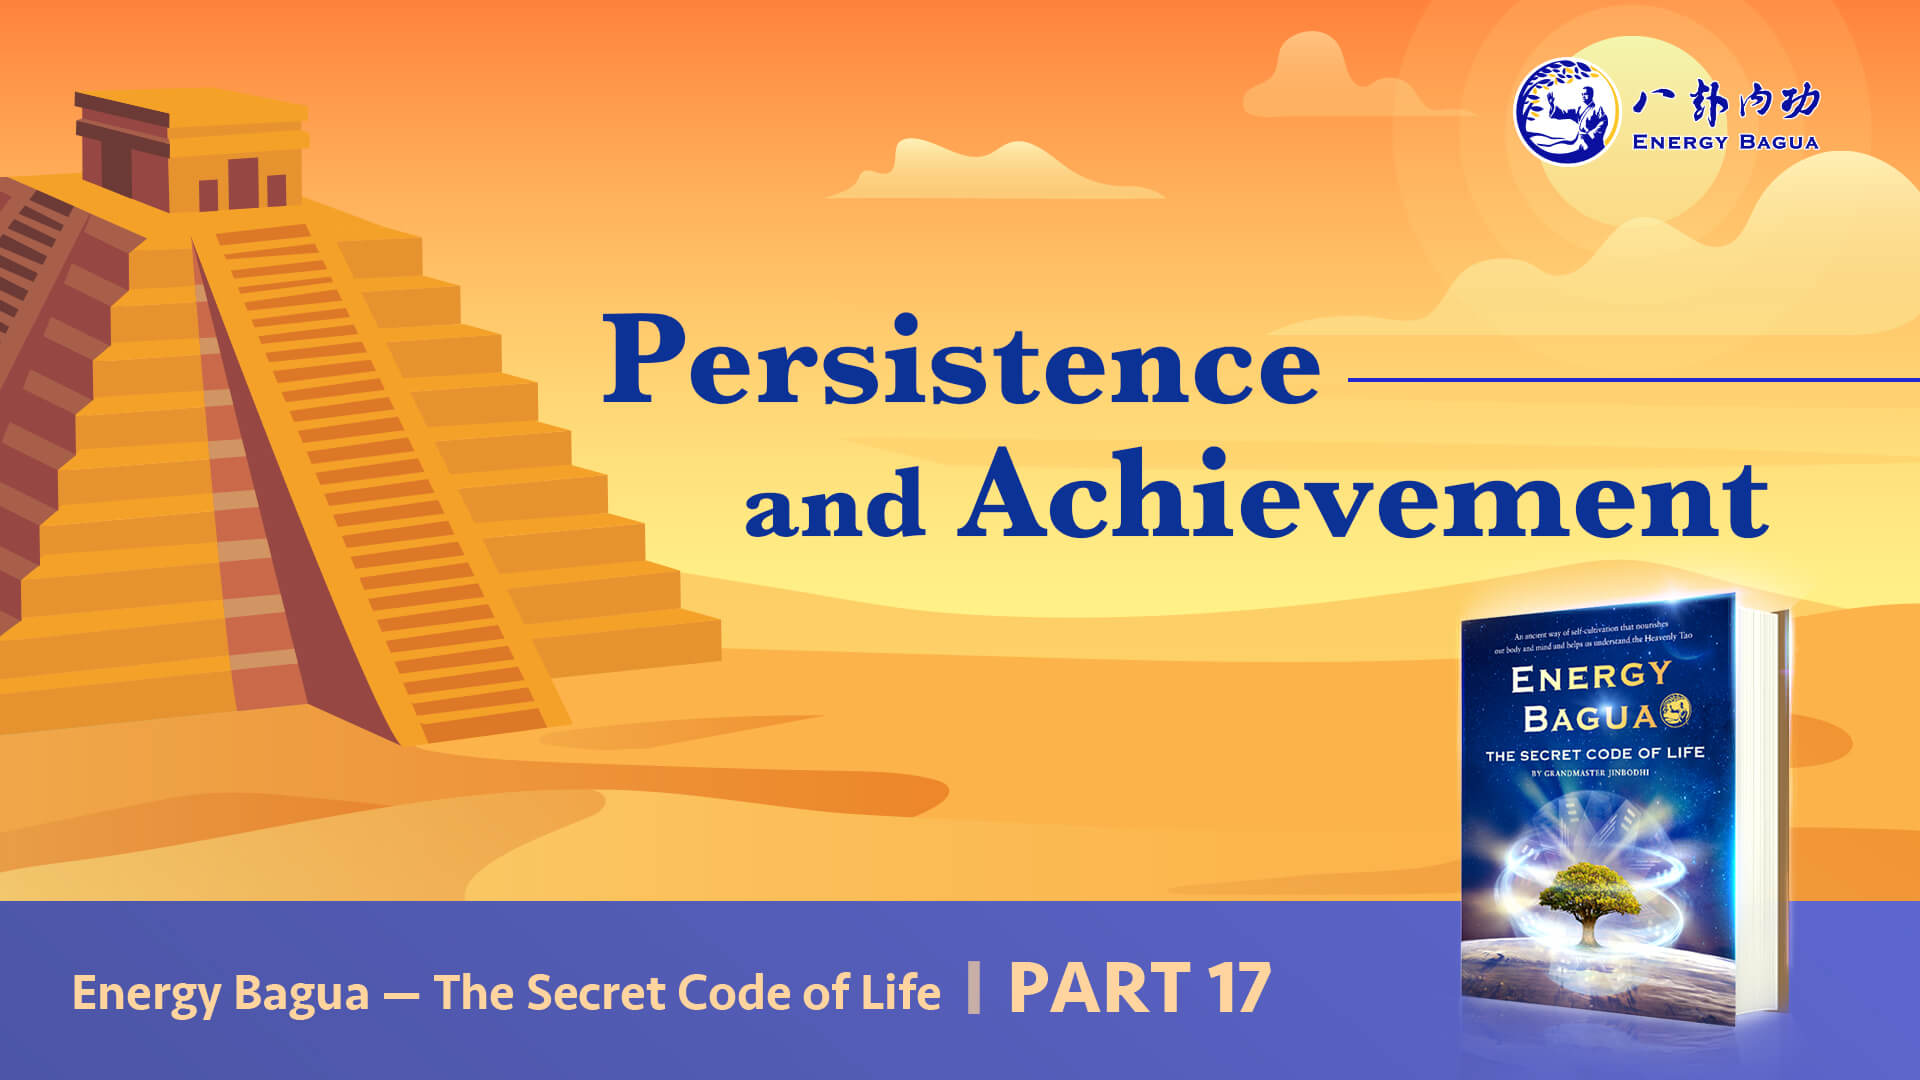 Energy Bagua - The Secret Code of Life Part 17: Persistence and Achievement